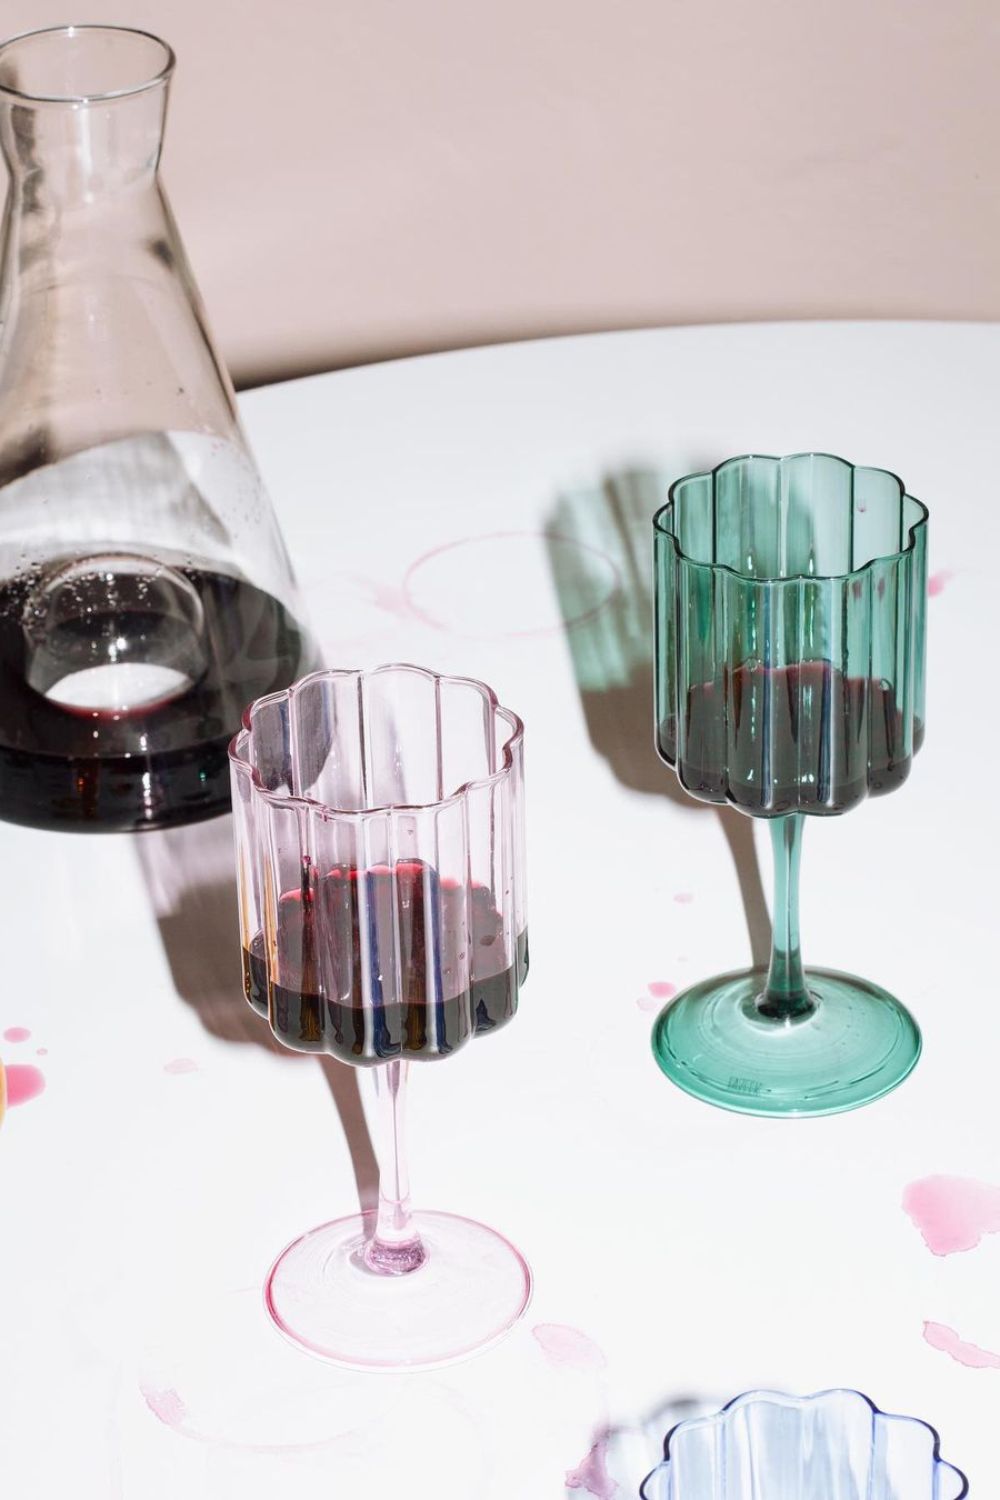 Wine glasses are a great gift for wine lovers who already have plenty of bottles in their collection.